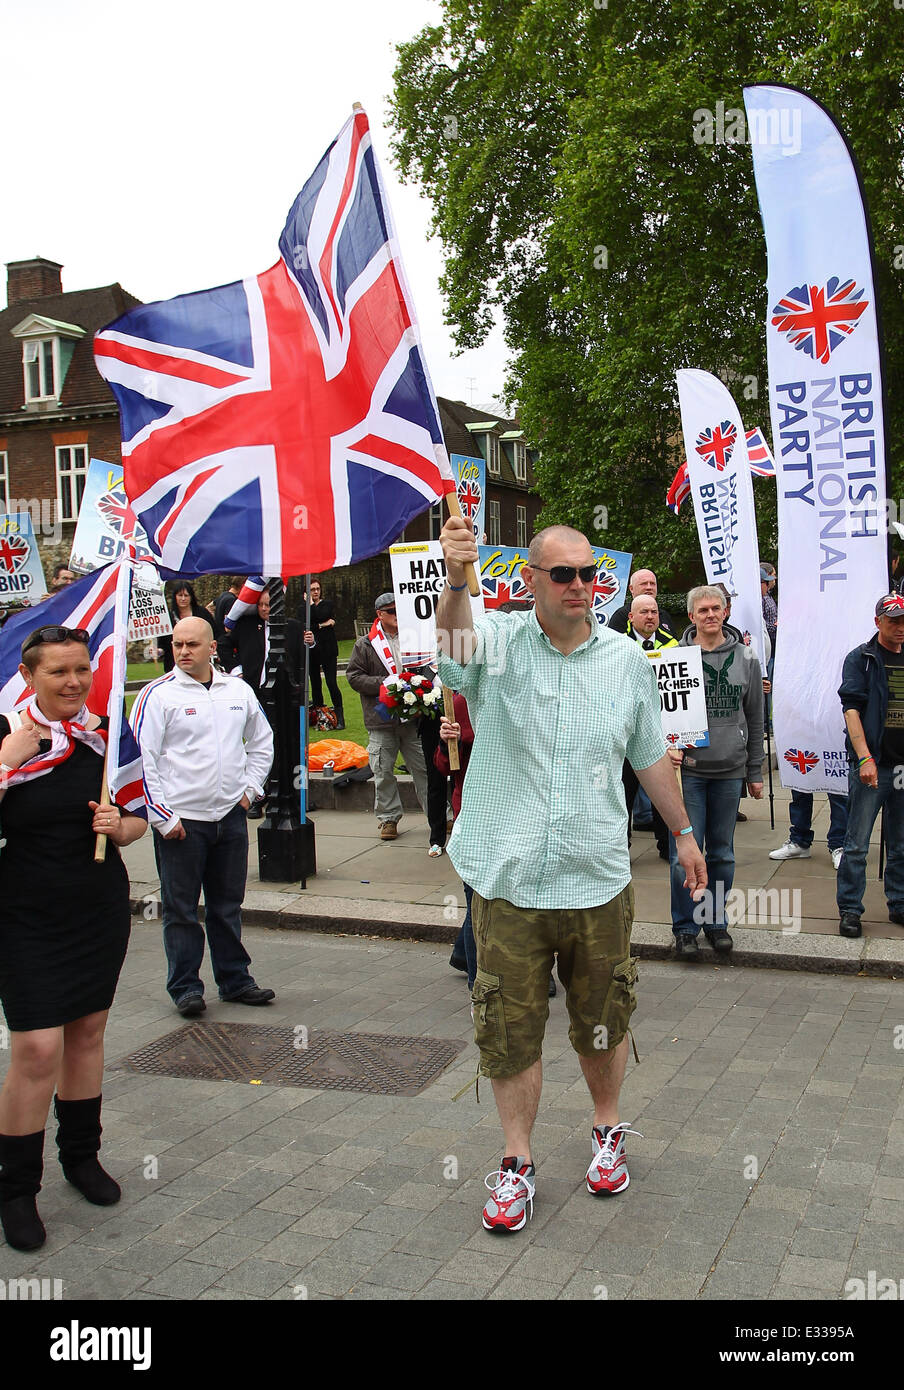 The British National Party demonstration in reaction to the murder of Drummer Lee Rigby is halted by Unite Against Fascism suppo Stock Photo